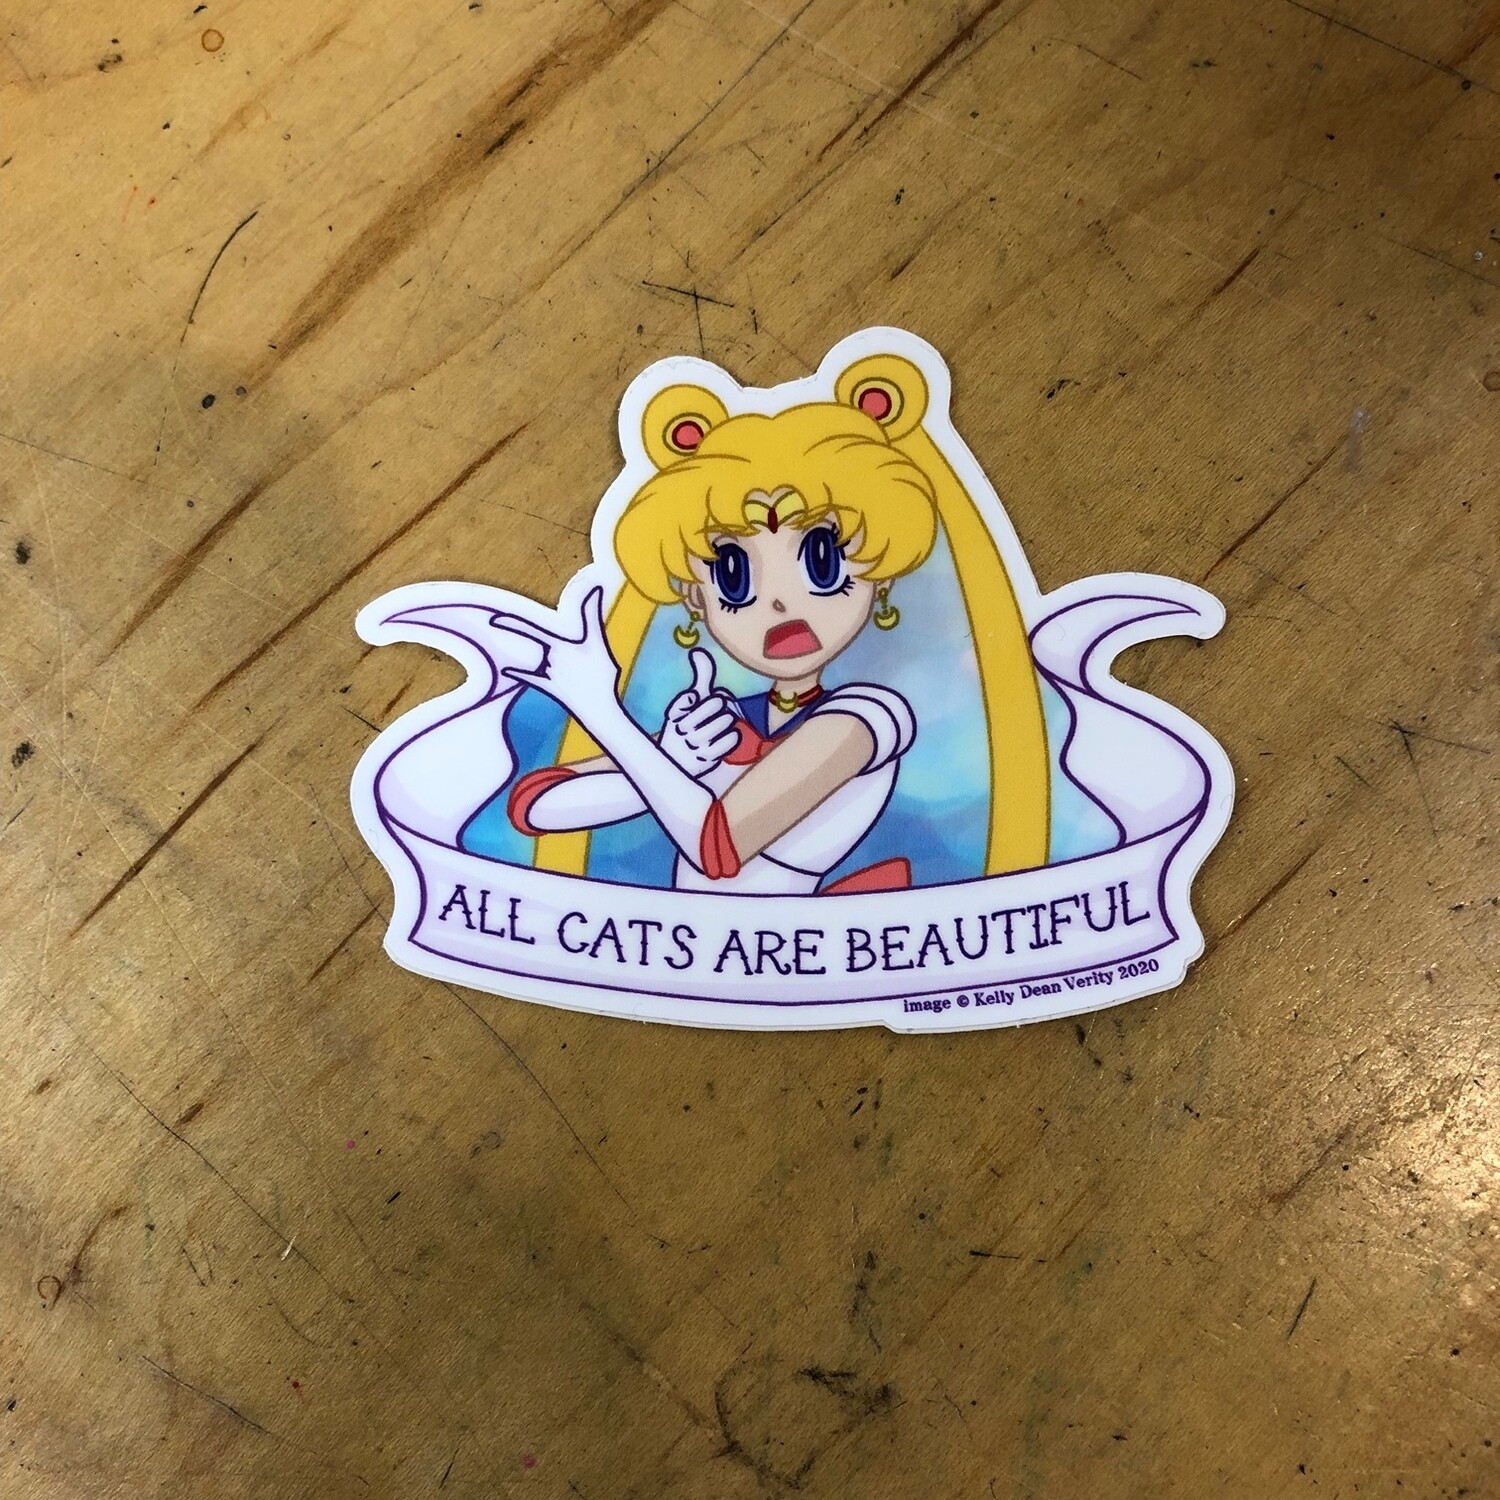 All Cats Are Beautiful - Sticker by Kelly Dean Verity